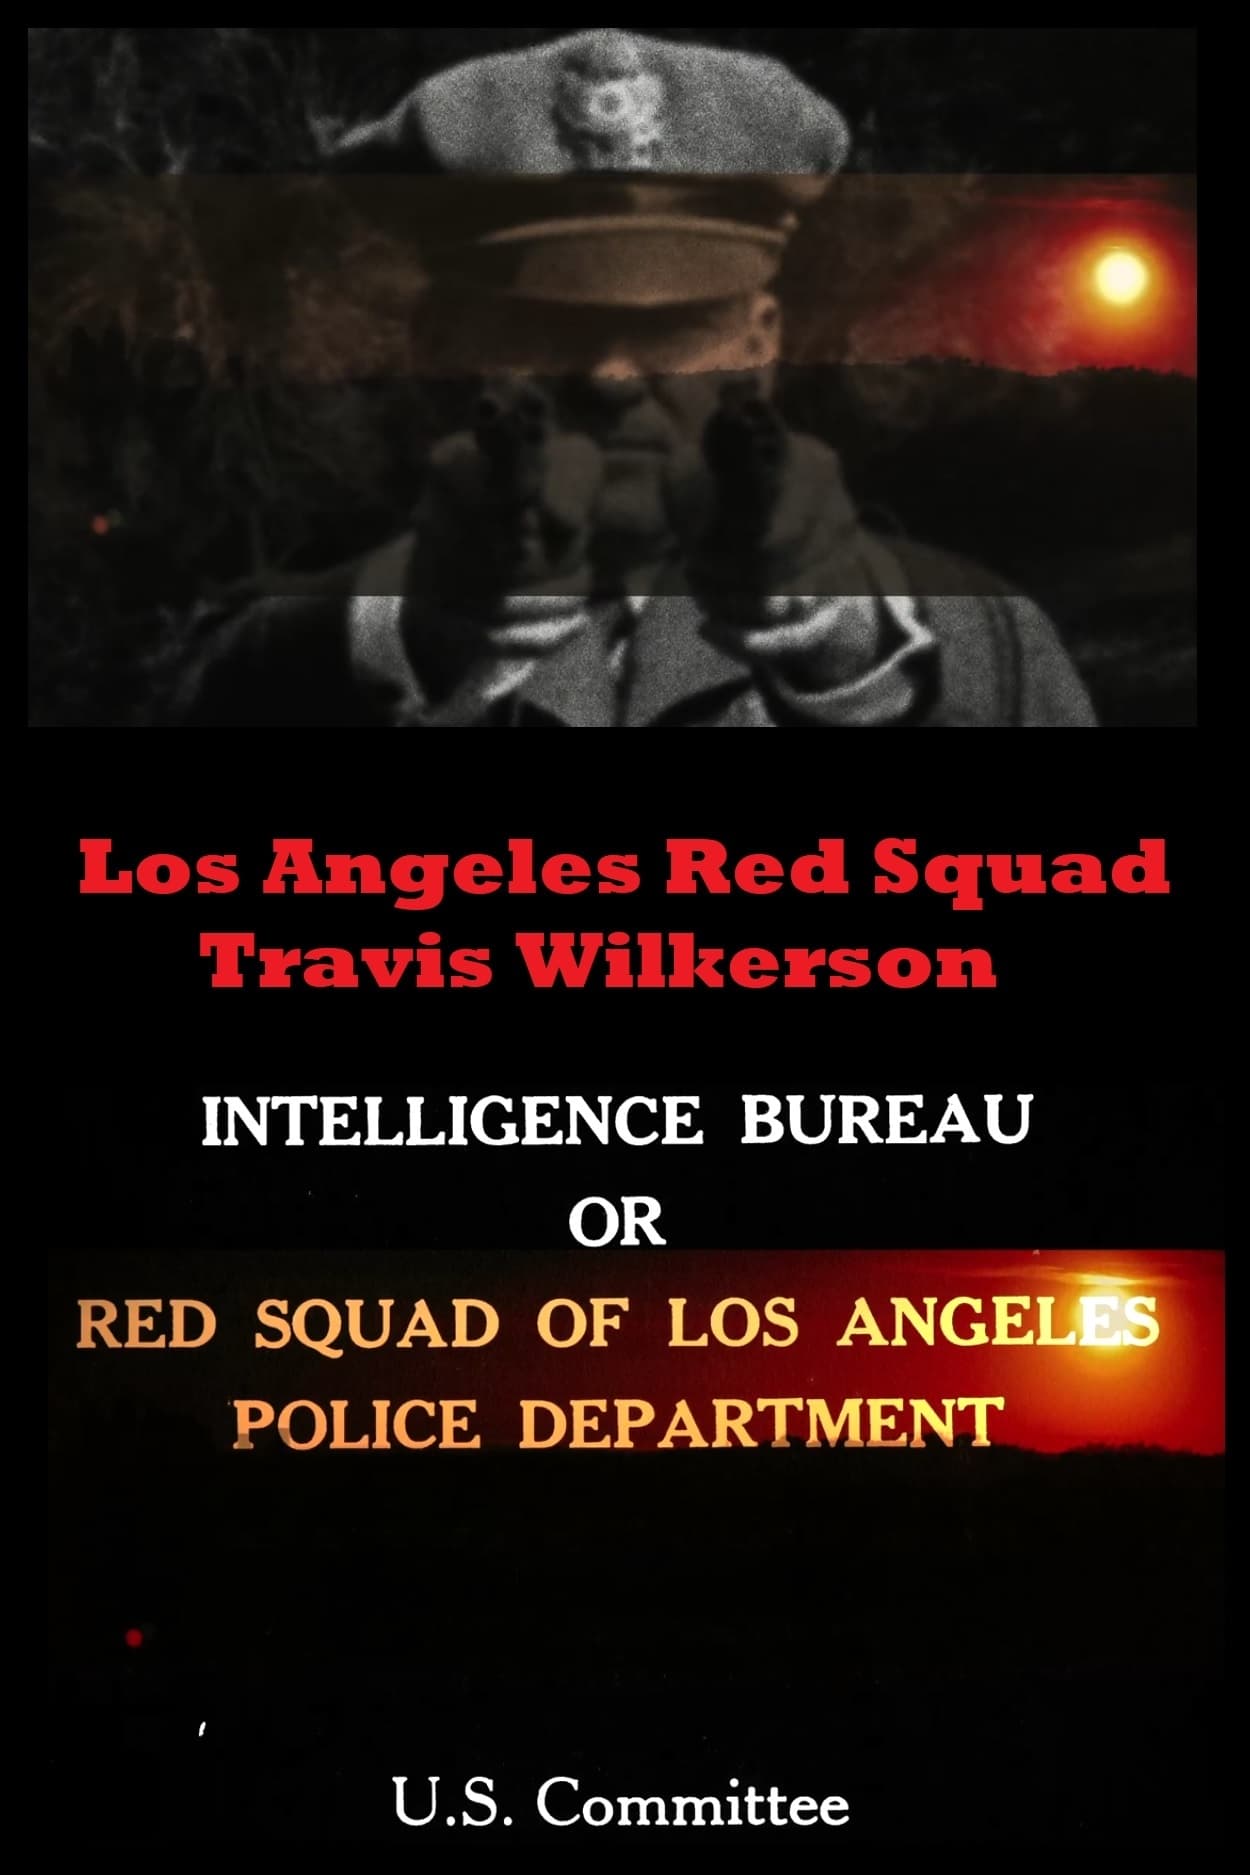 Los Angeles Red Squad: The Communist Situation in California